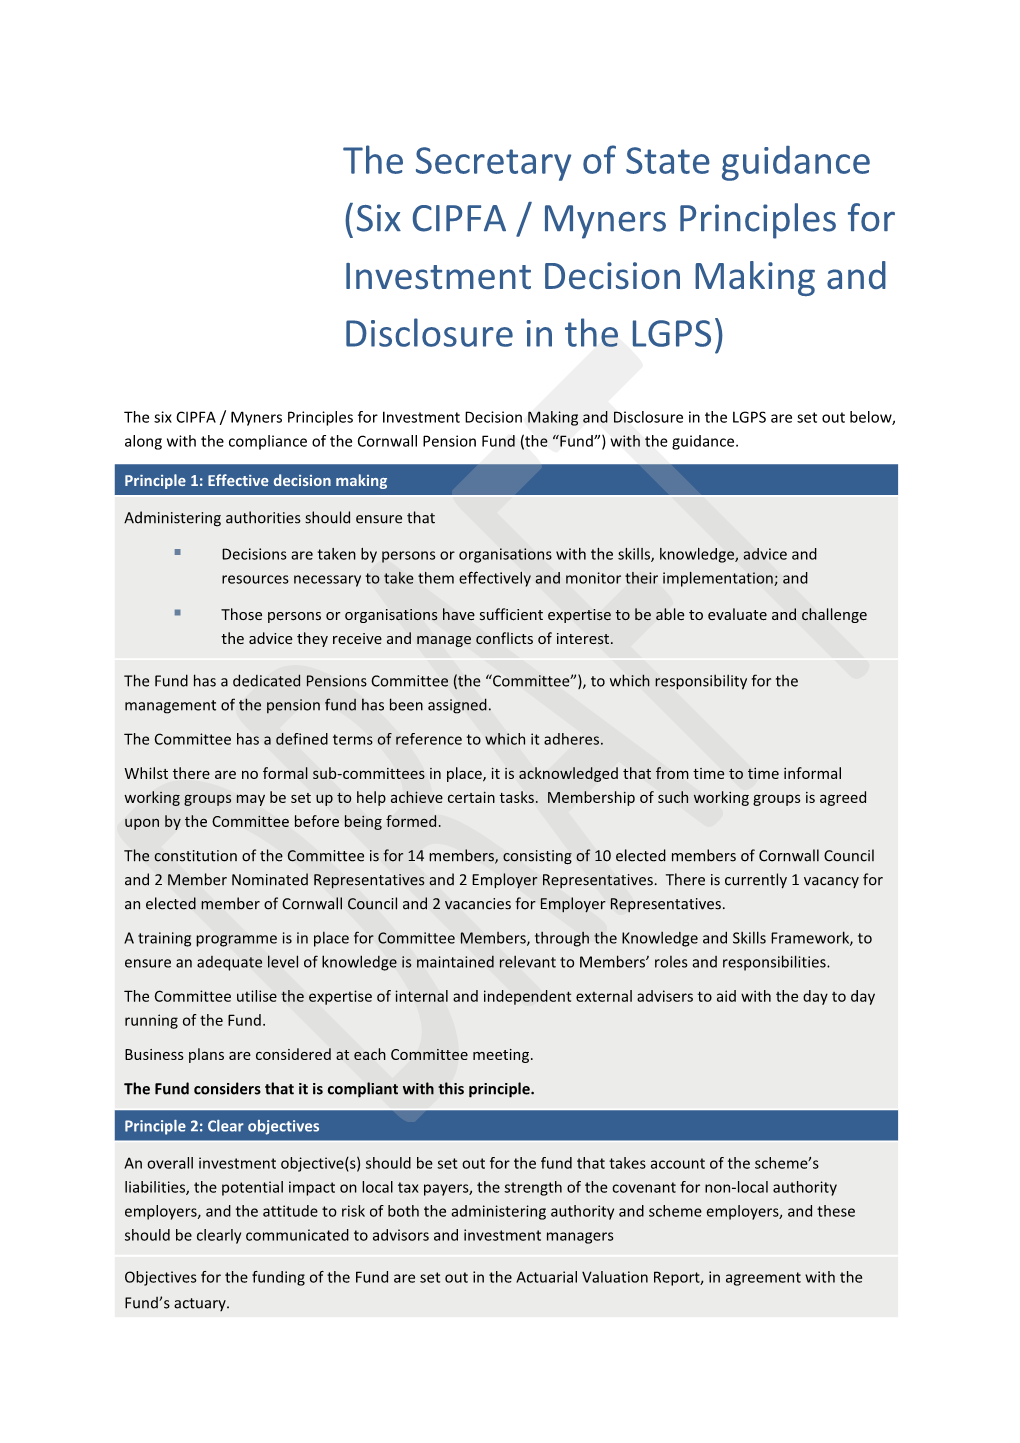 The Secretary of State Guidance (Six CIPFA / Myners Principles for Investment Decision